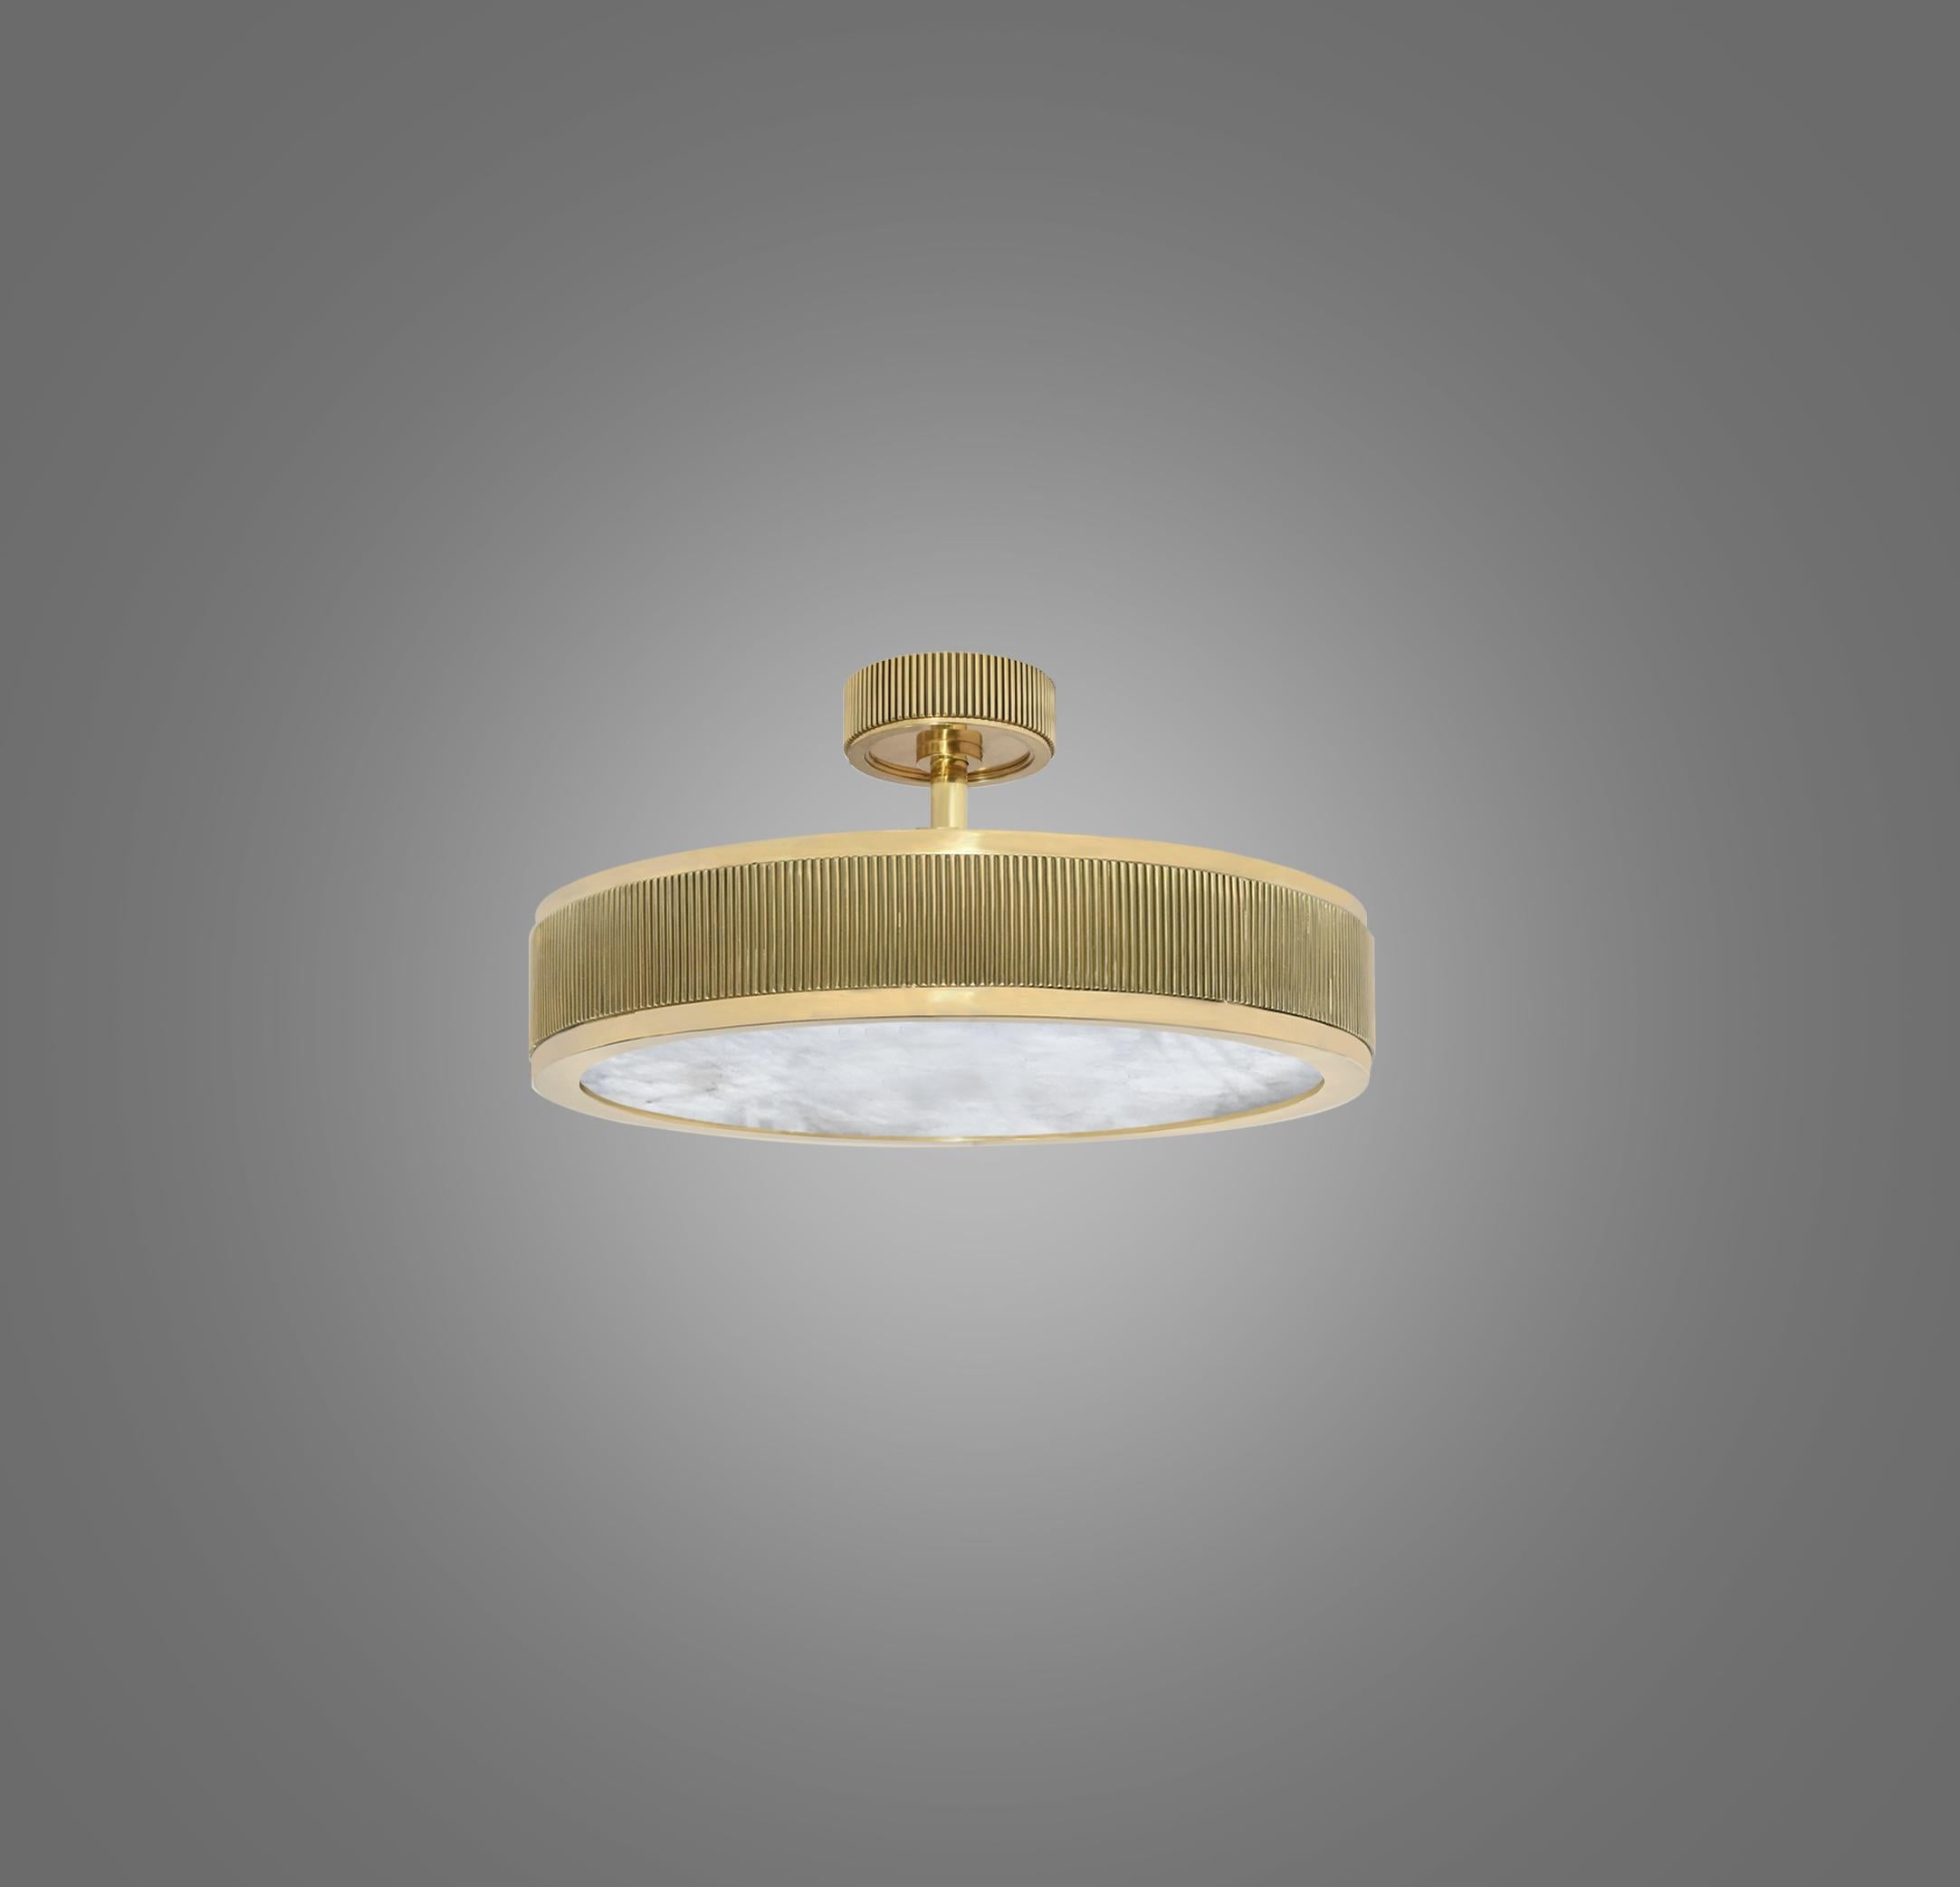 Rock crystal semi flush mount with polished brass frame. Created by Phoenix Gallery, NYC.

Height can be adjustable.
